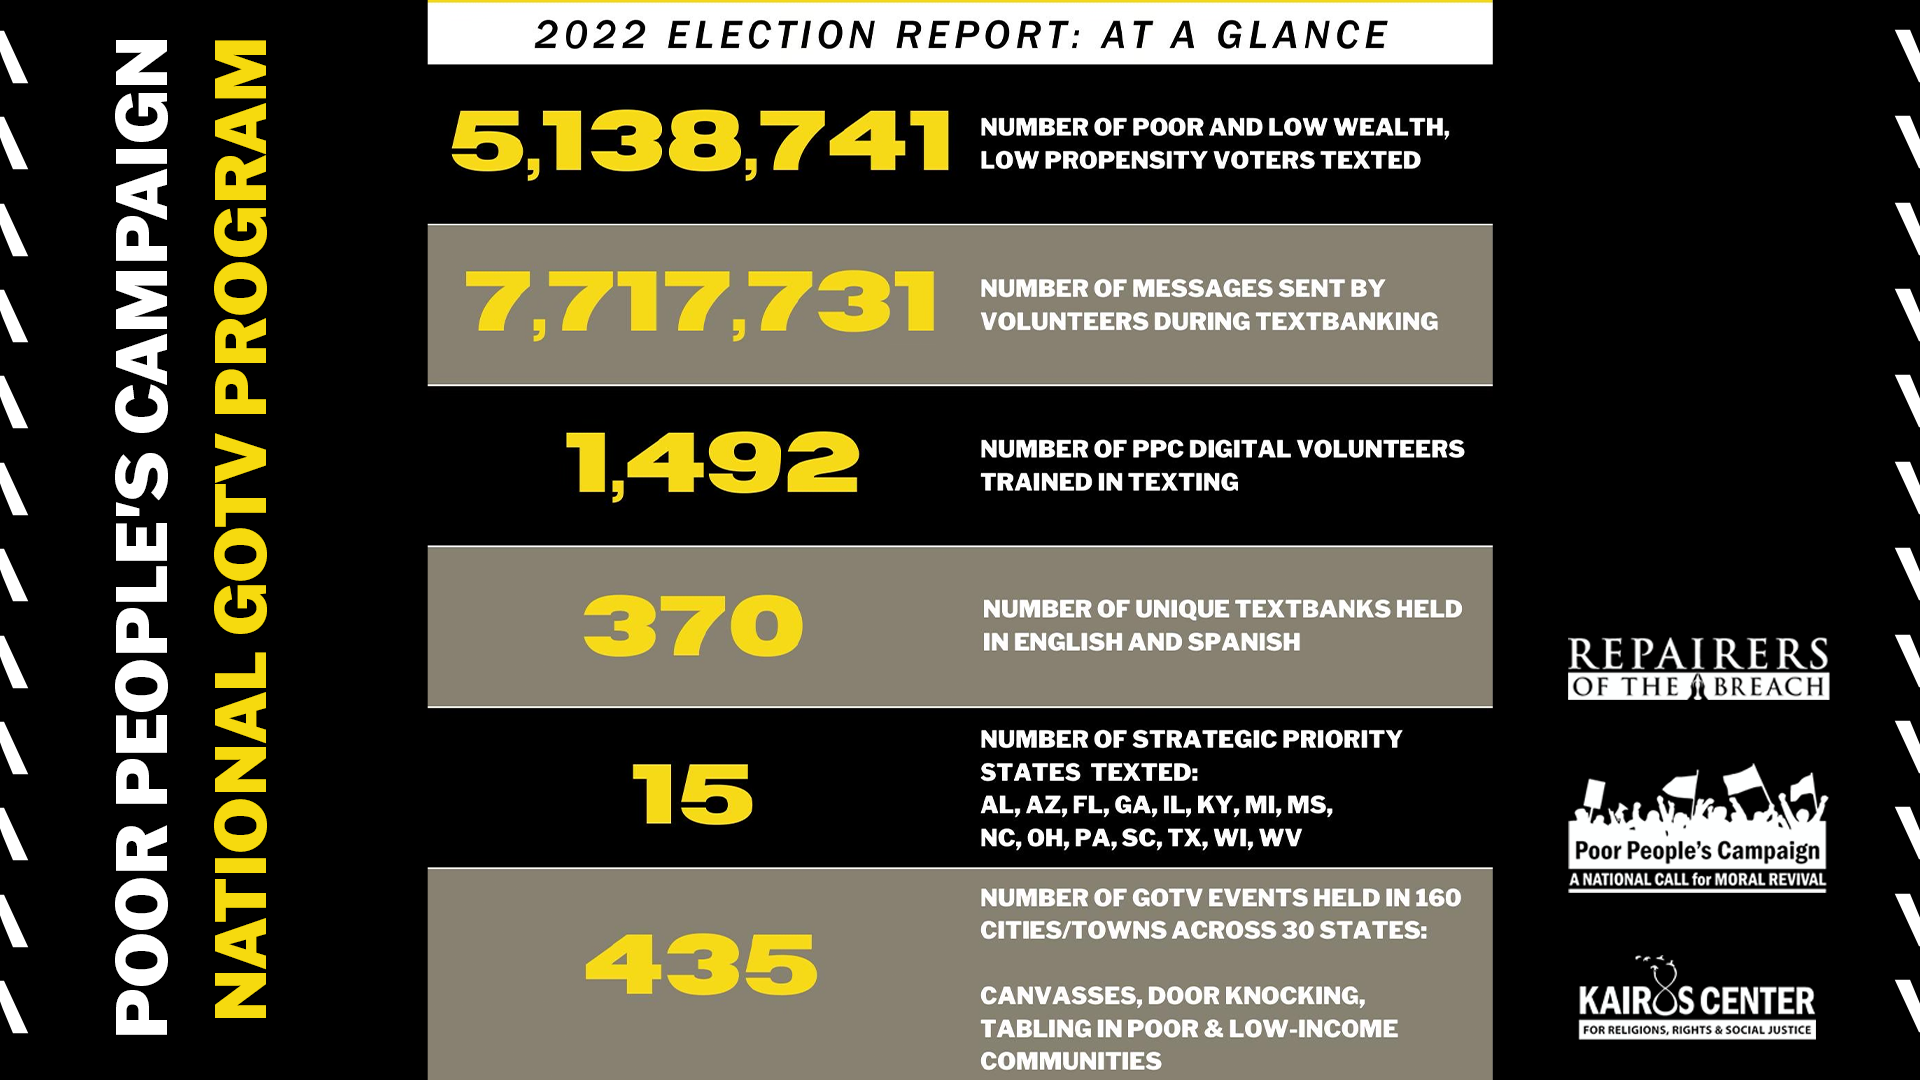 Picture of the successful stats from the PPC's National GOTV program. Over 5.1 million voters were contacted!